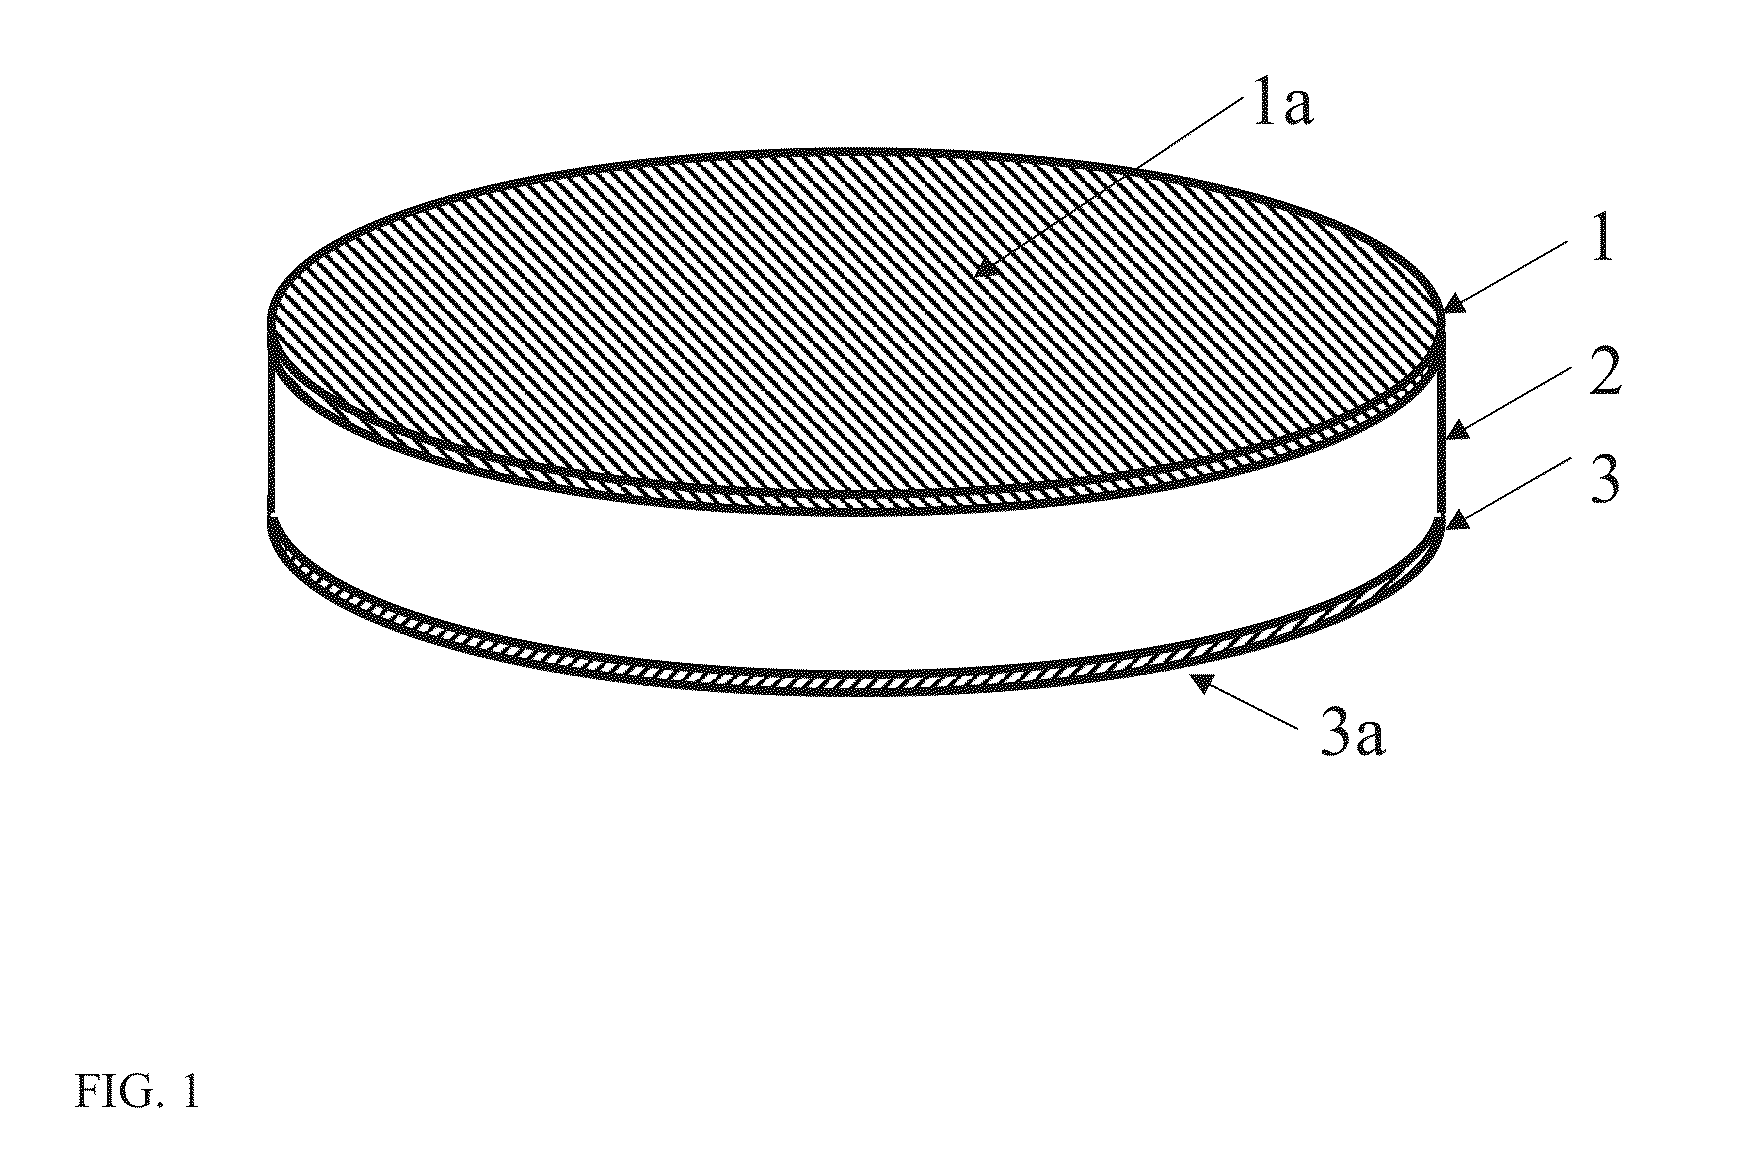 Group III nitride wafer and its production method